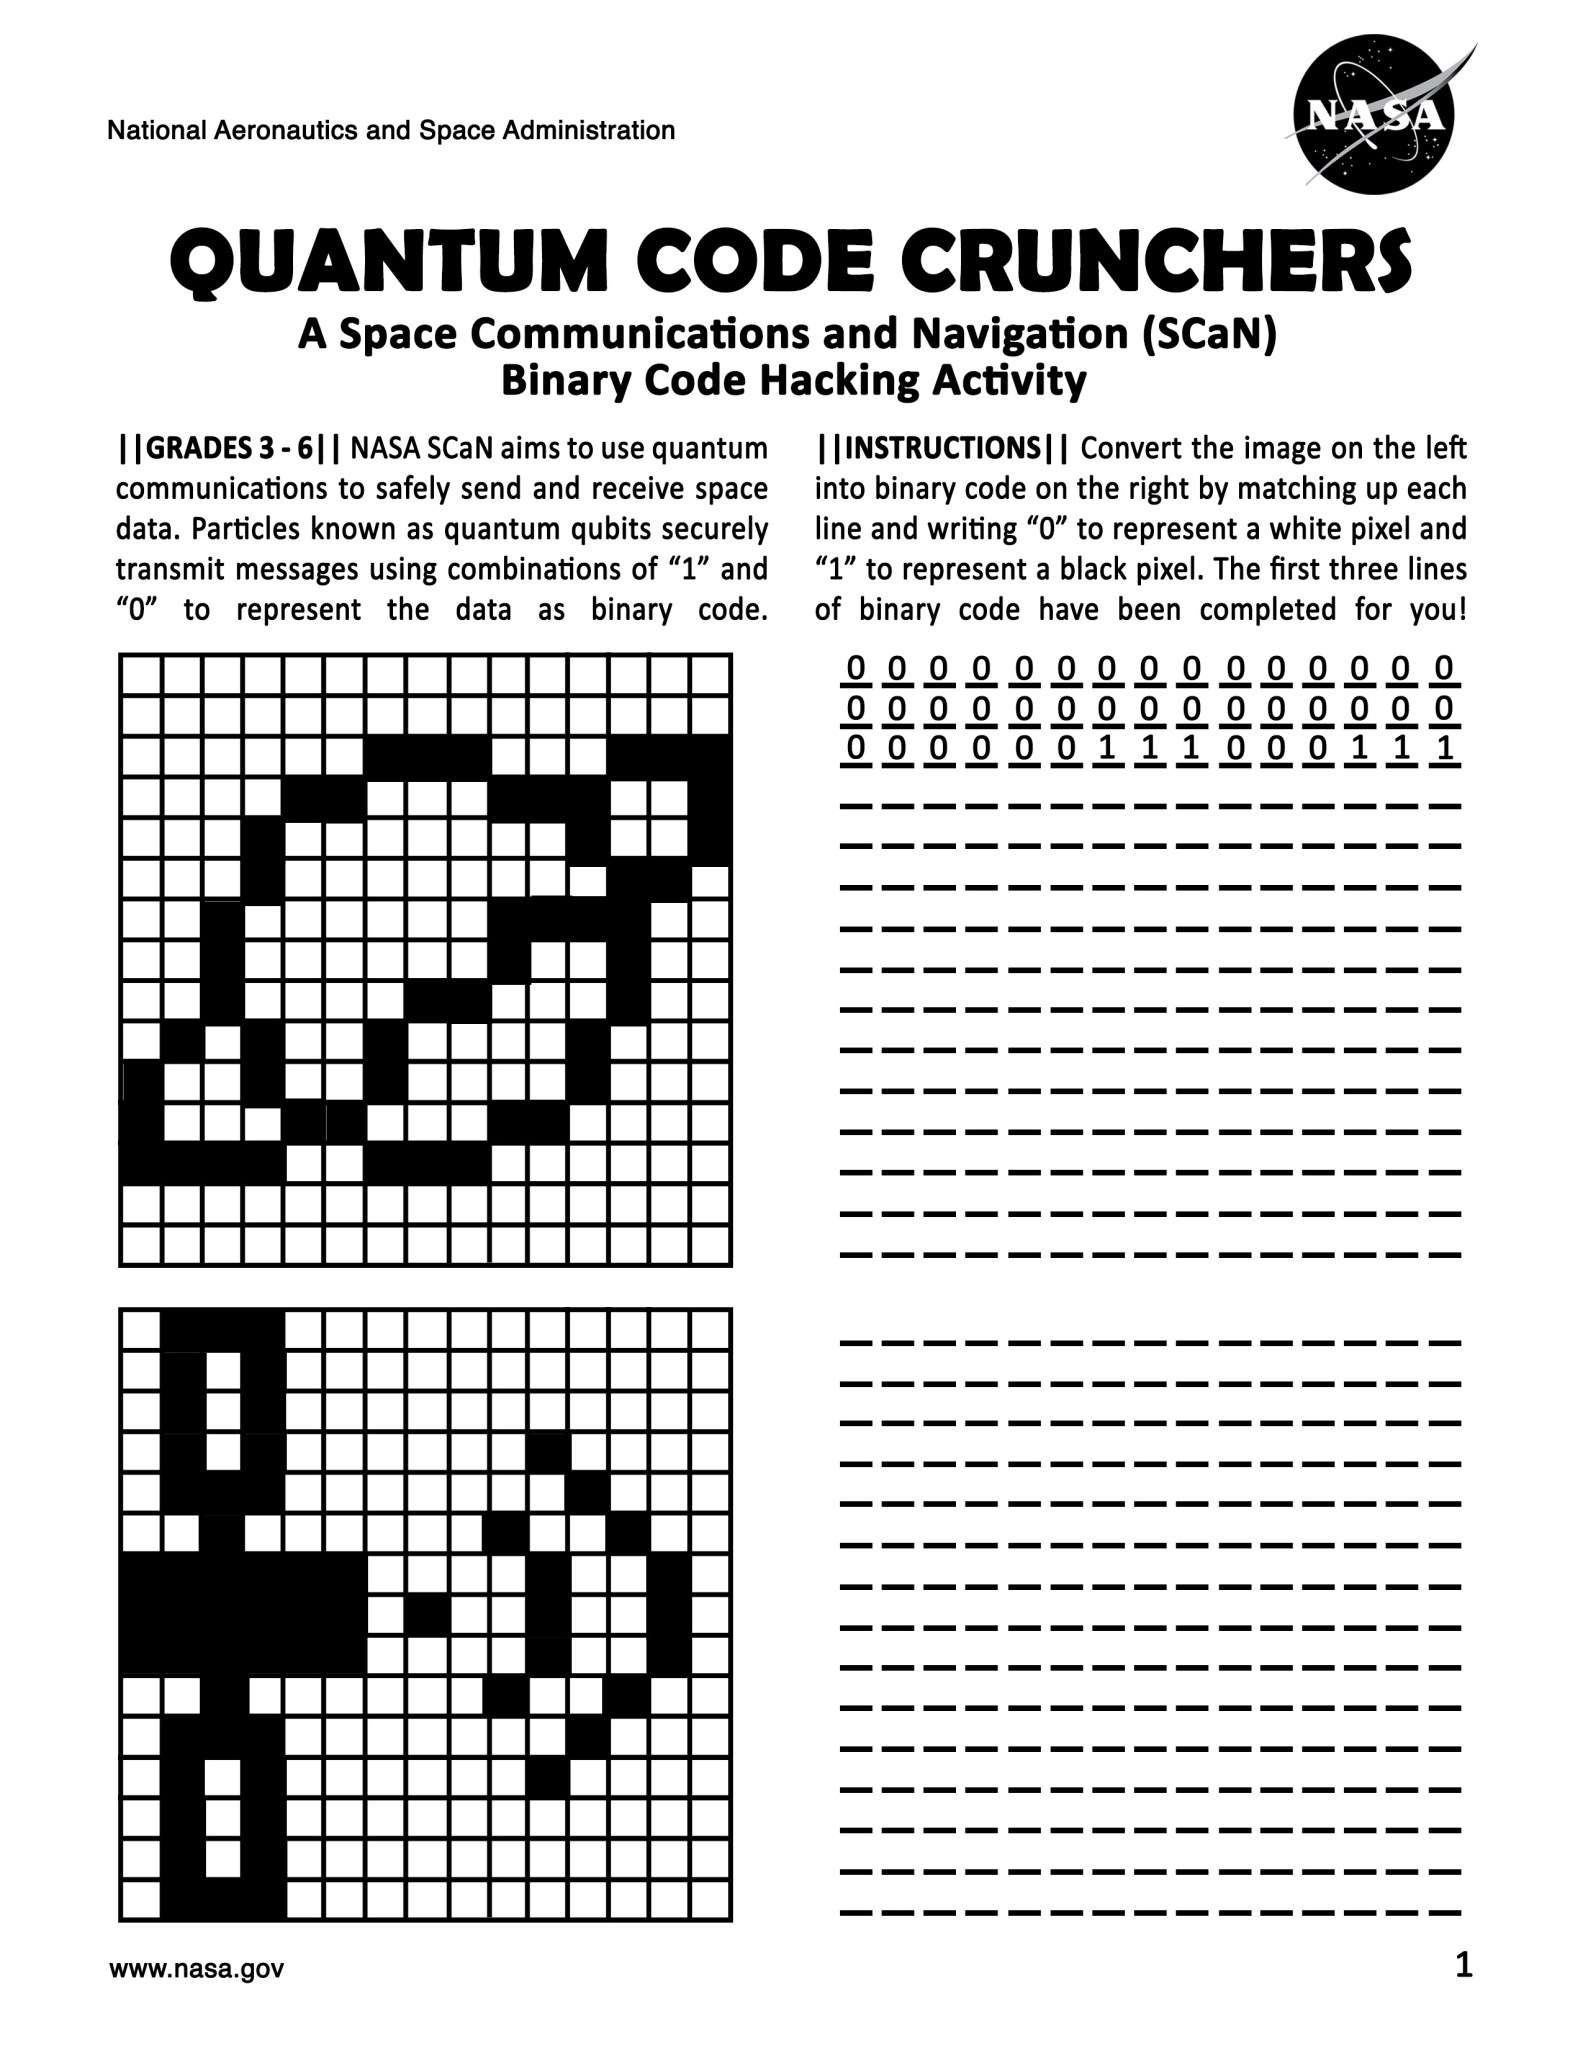 Worksheet with four grids. Text reads: Quantum Code Crunchers, a Space Communications and Navigation (SCaN) Binary Code Hacking Activity.